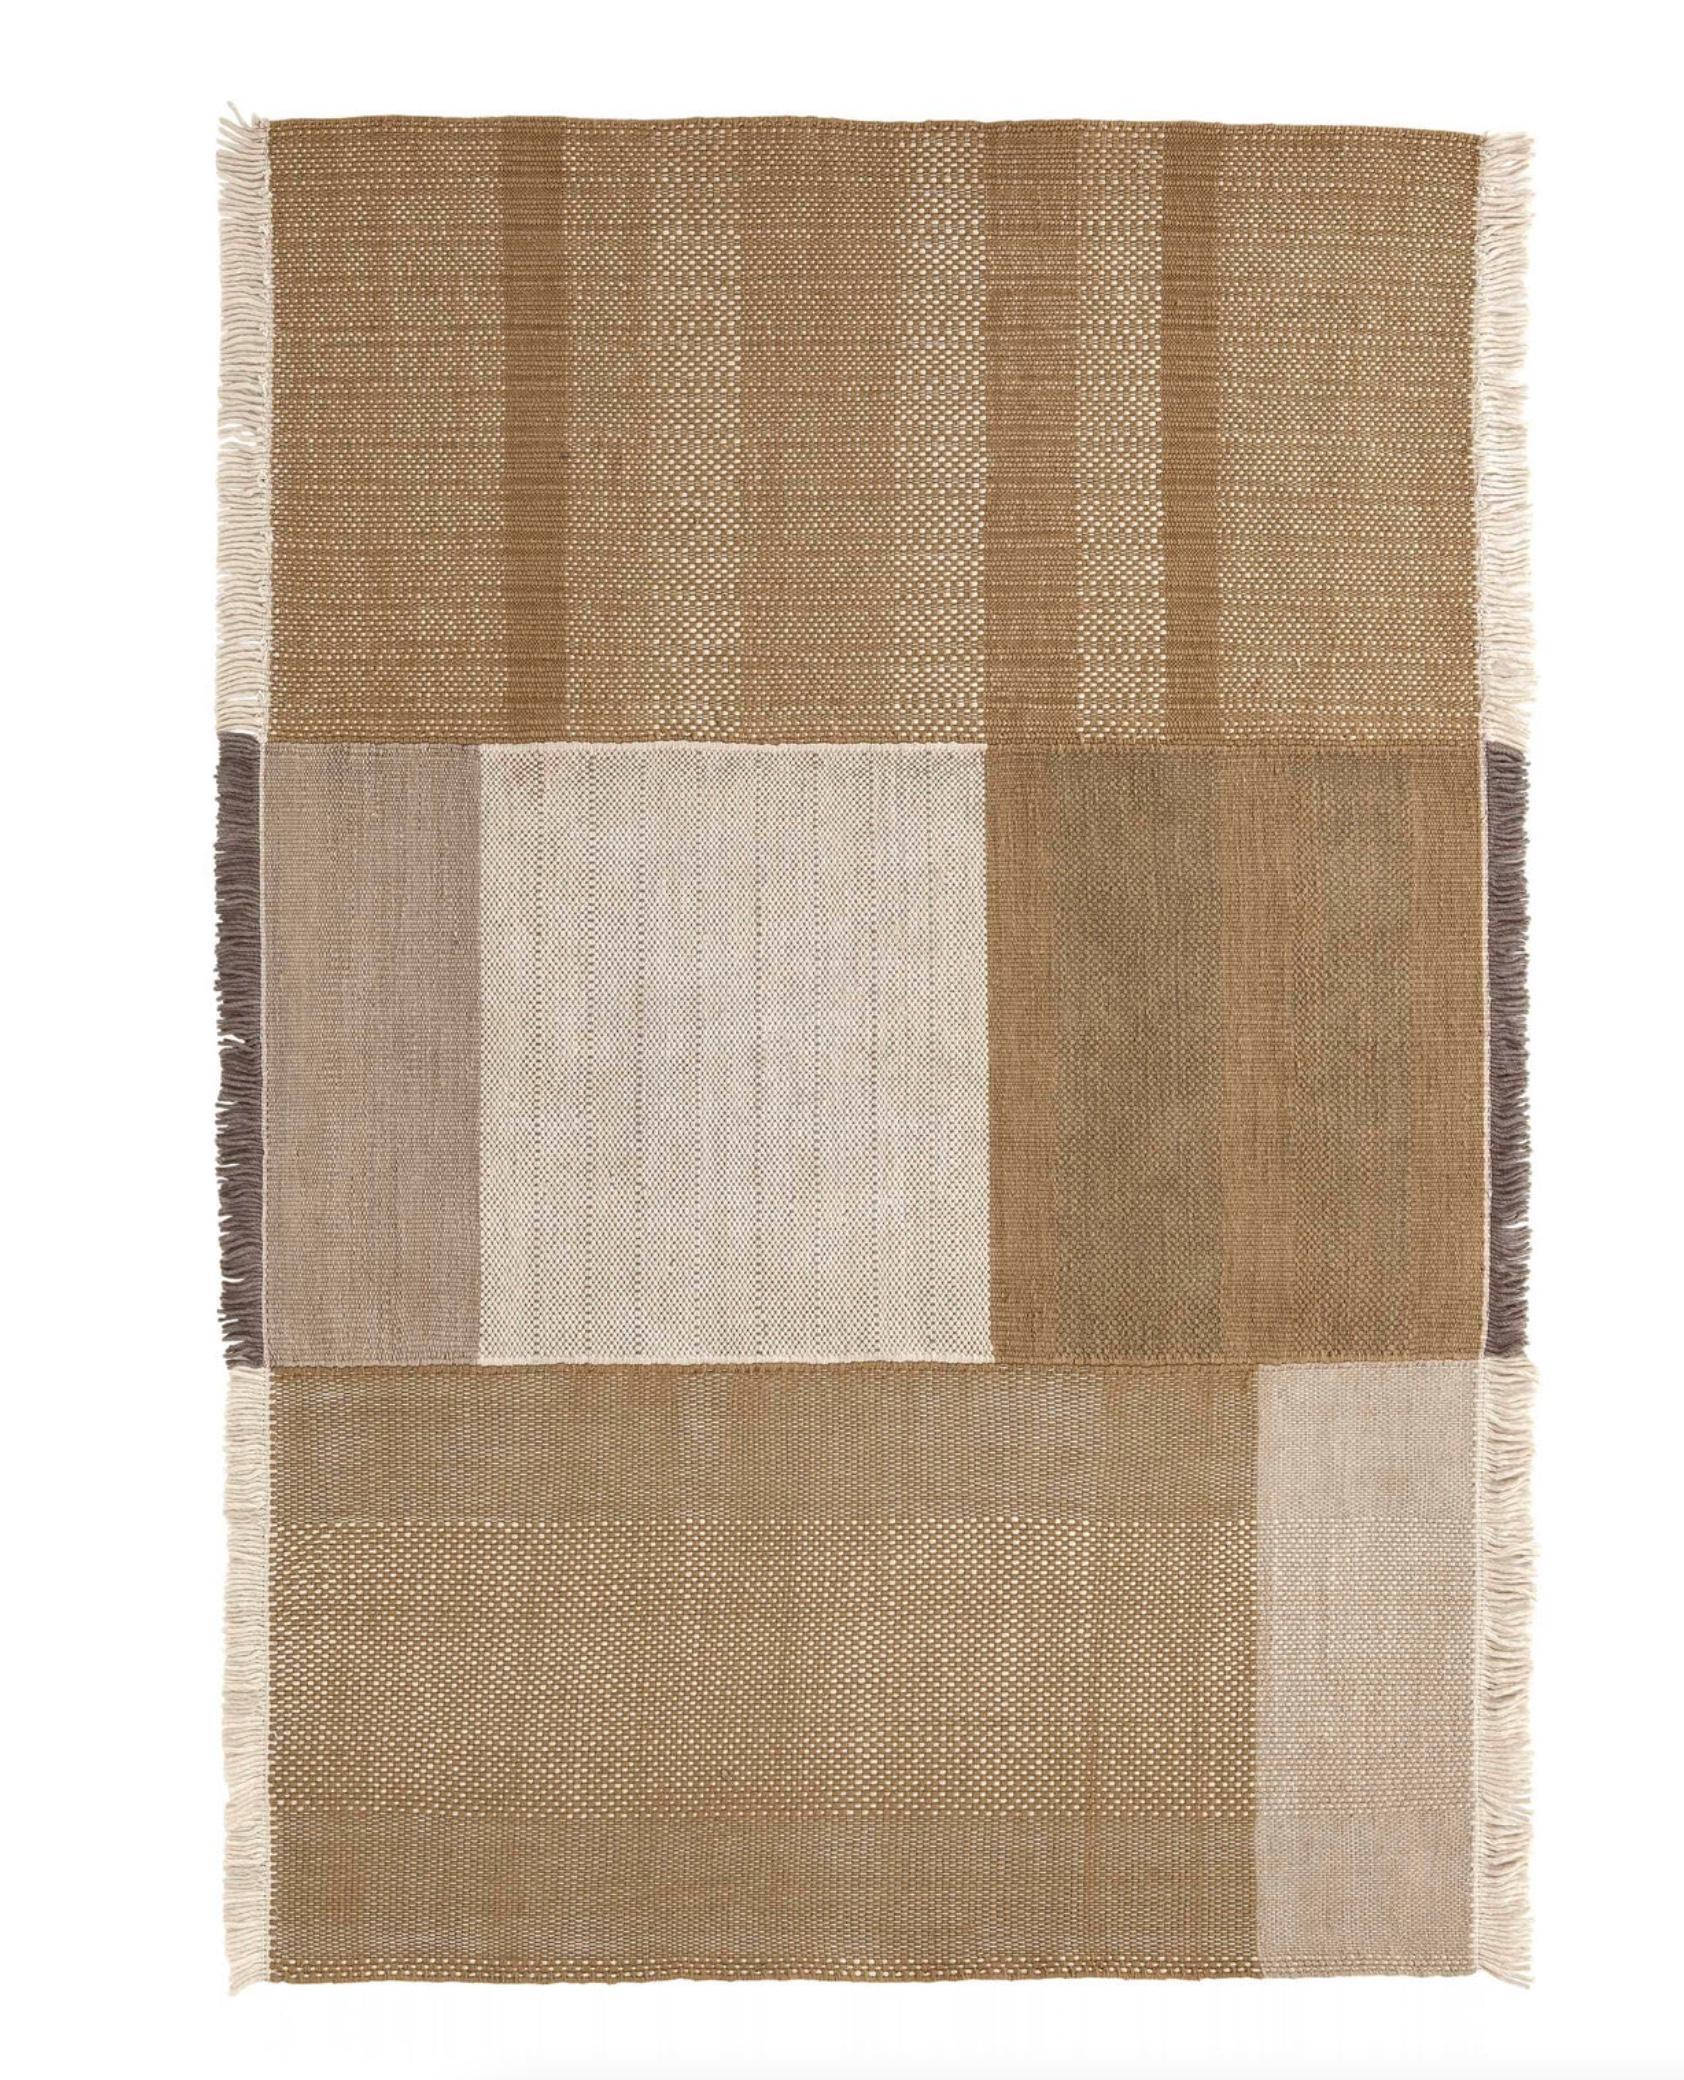 Nani Marquina & Elisa Padrón 'Tres' Outdoor Rug in Ochre For Sale 2